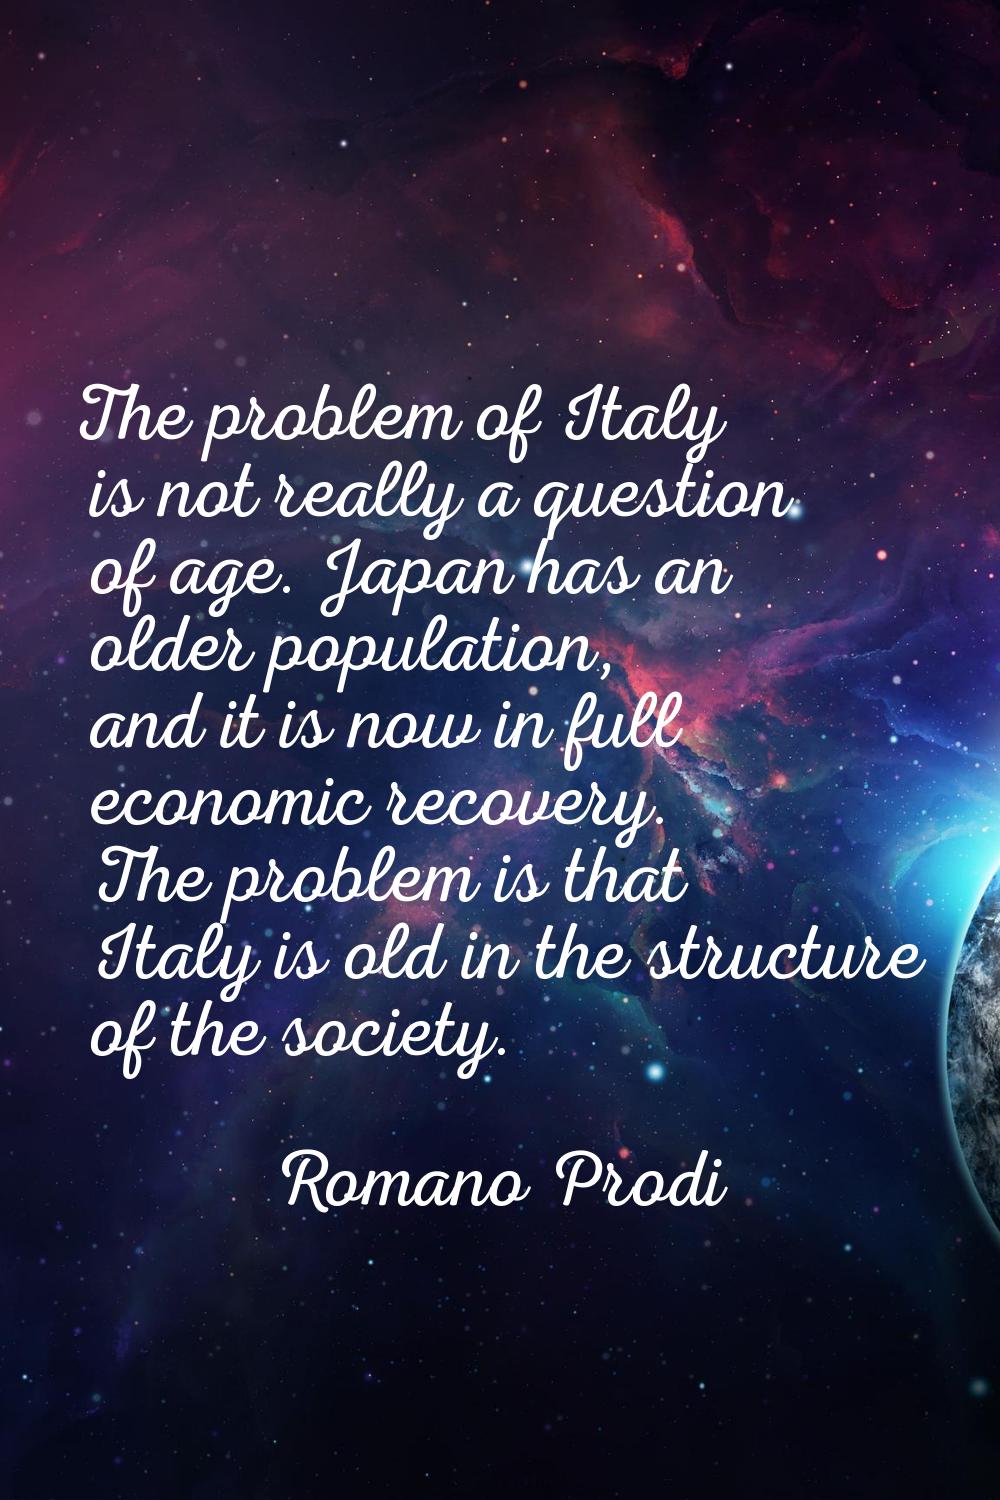 The problem of Italy is not really a question of age. Japan has an older population, and it is now 